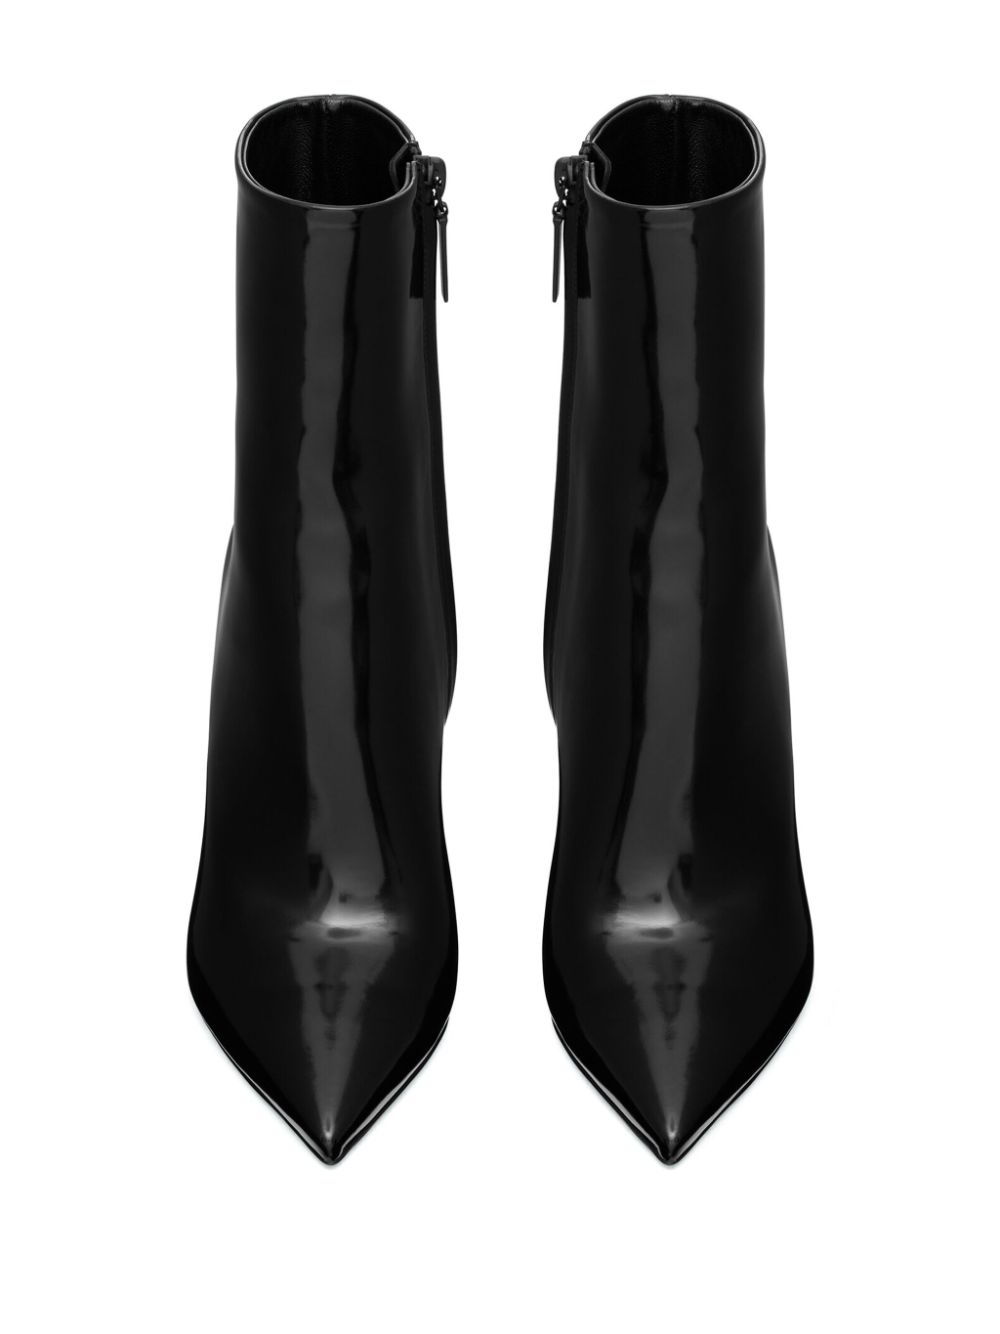 SAINT LAURENT Stunning Black Leather Ankle Boots for Women - High Sculpted Heel